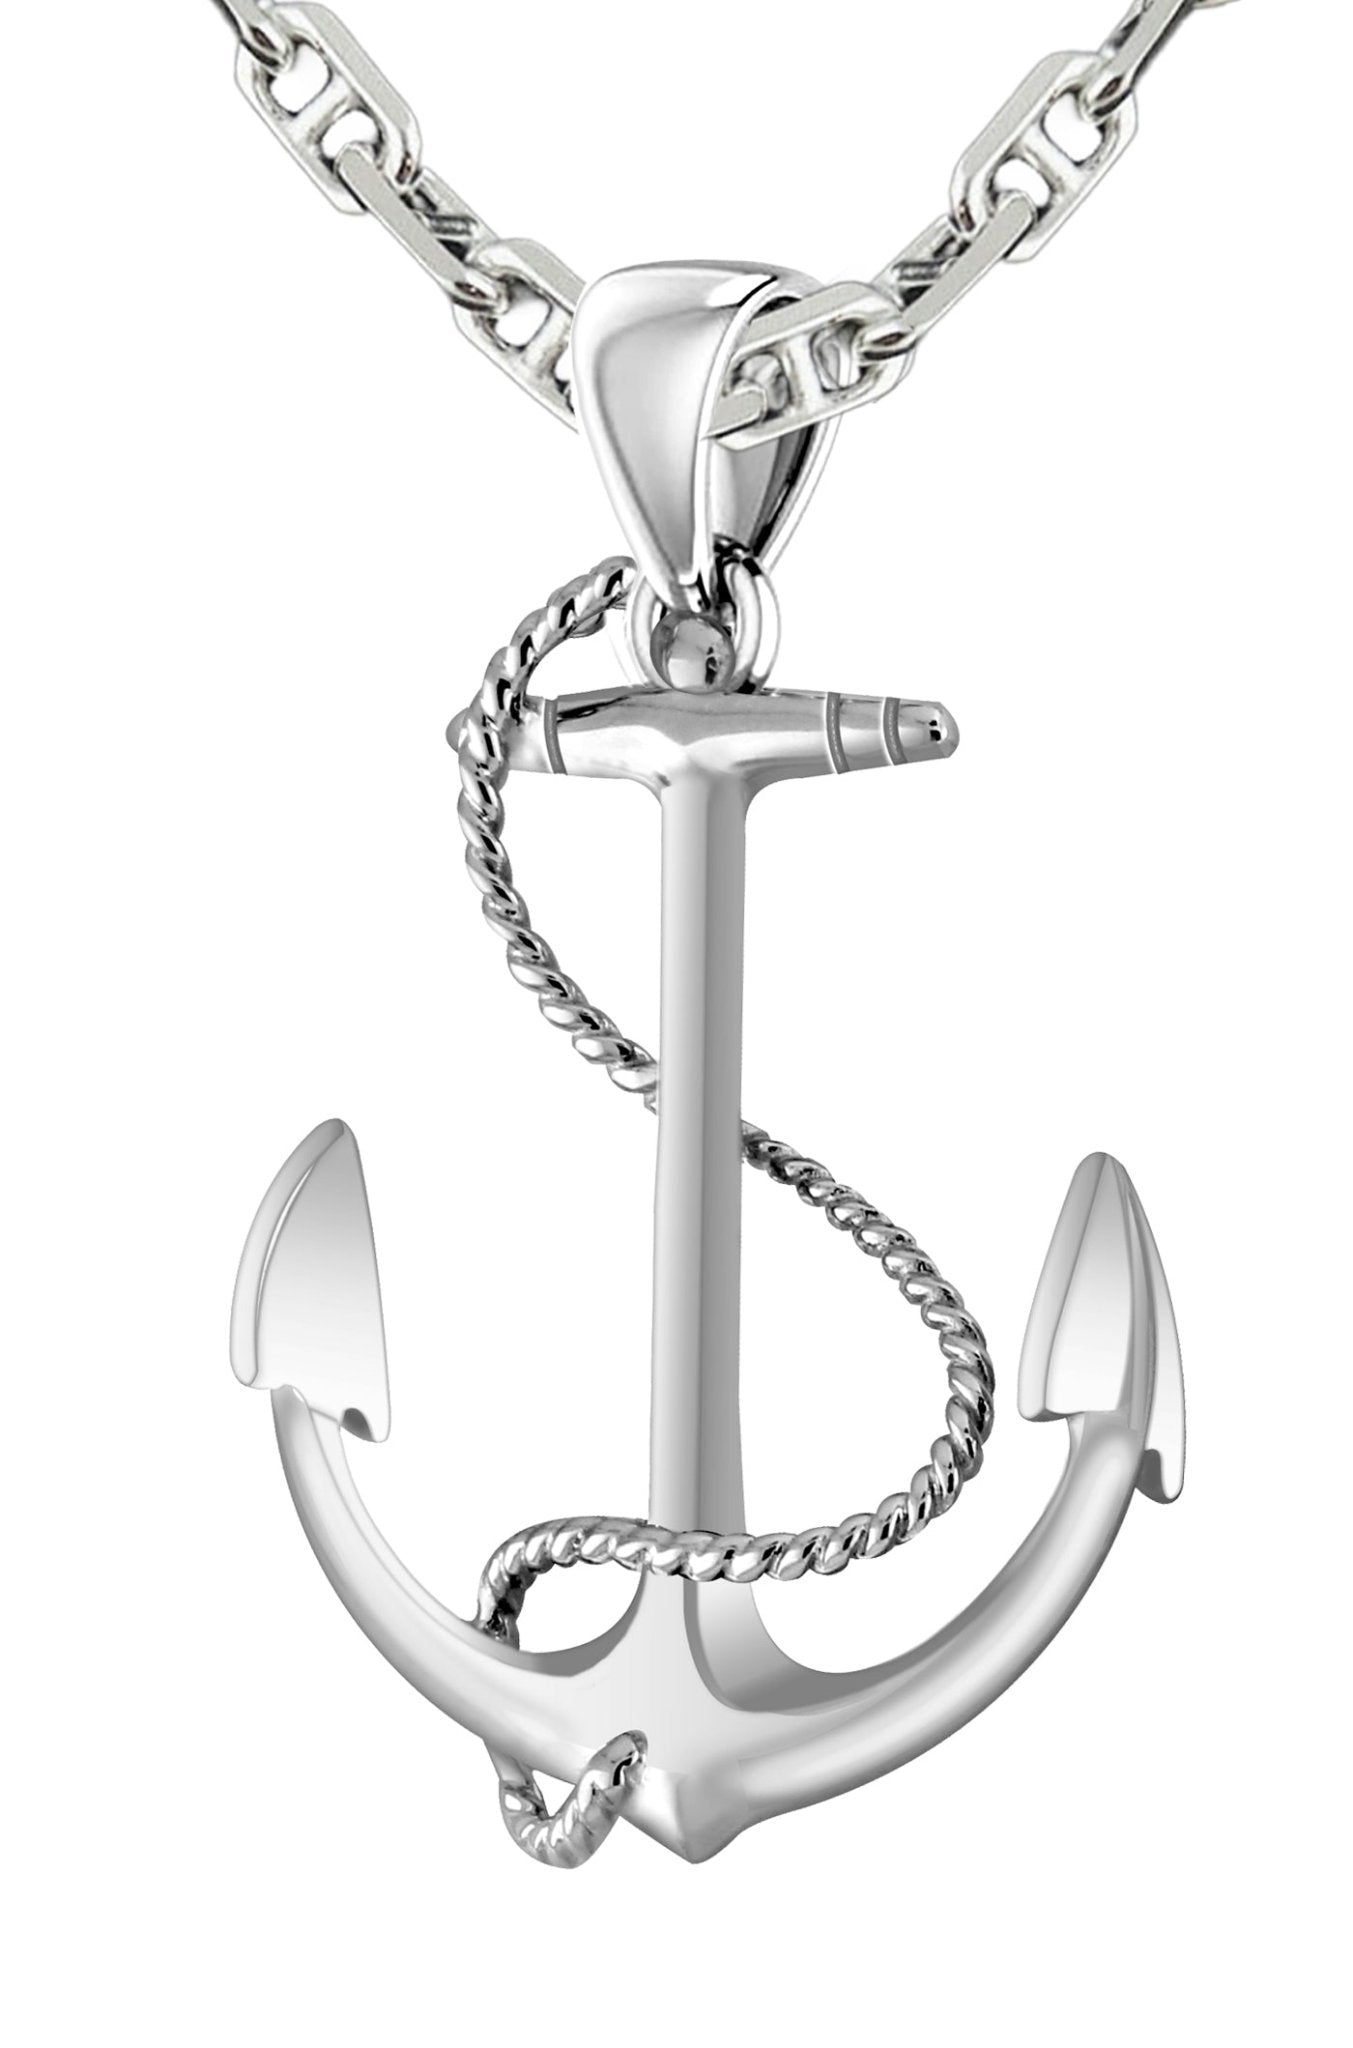 Buy M Men Style Ocean Nautical Anchor Dolphin Sea-life Pendant With Snake  Chain Copper Zinc Metal Necklace For Men And Women at Amazon.in